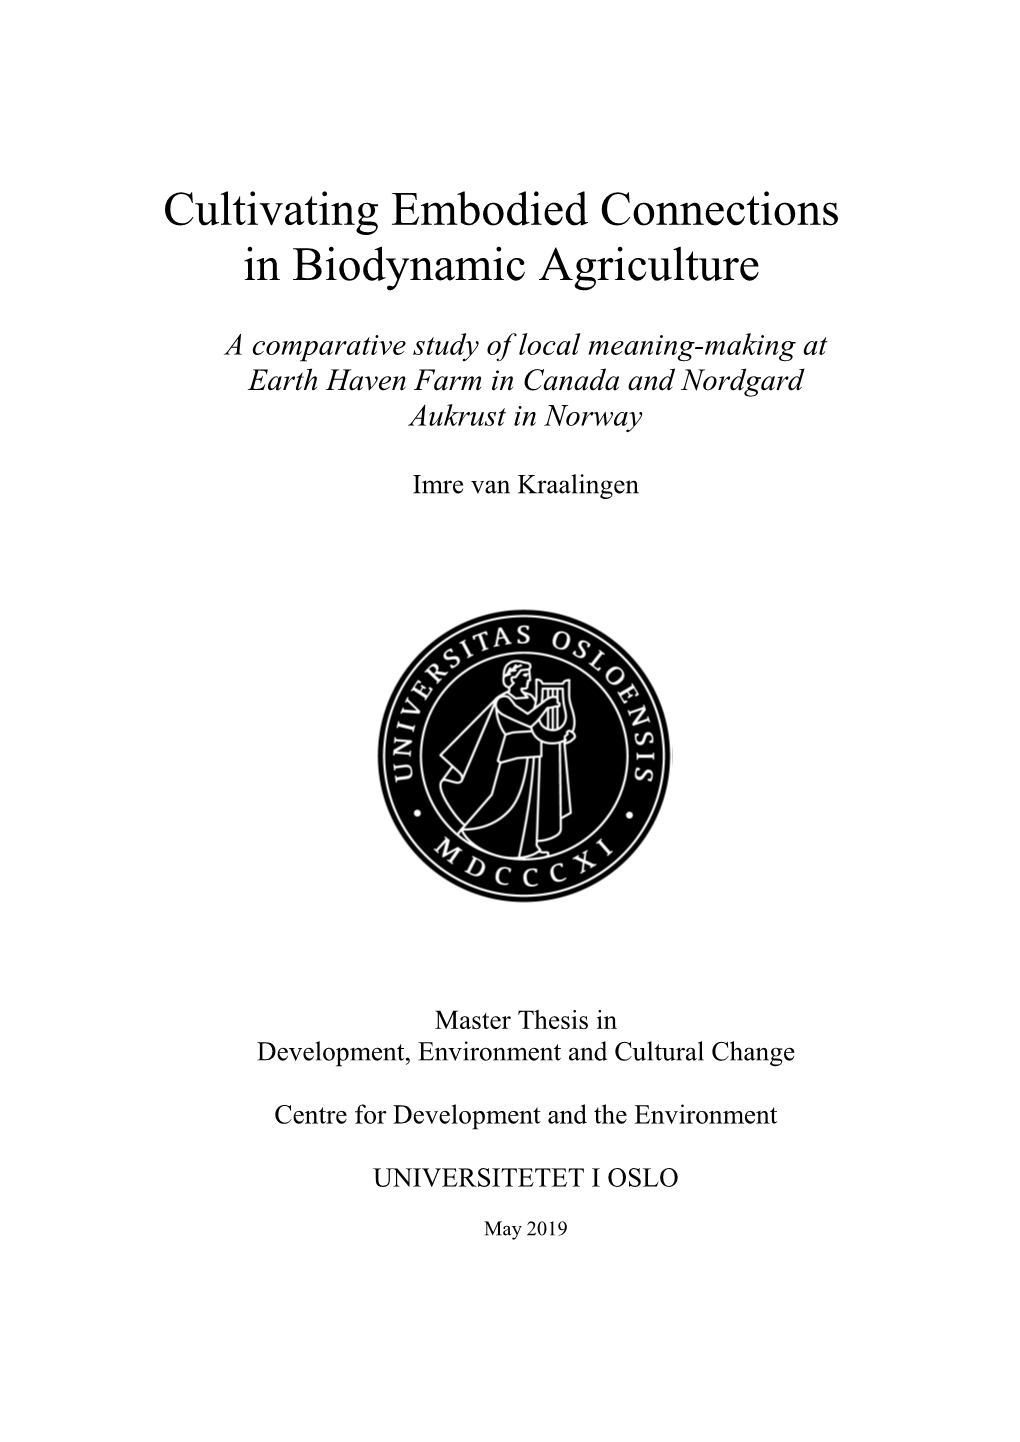 Cultivating Embodied Connections in Biodynamic Agriculture